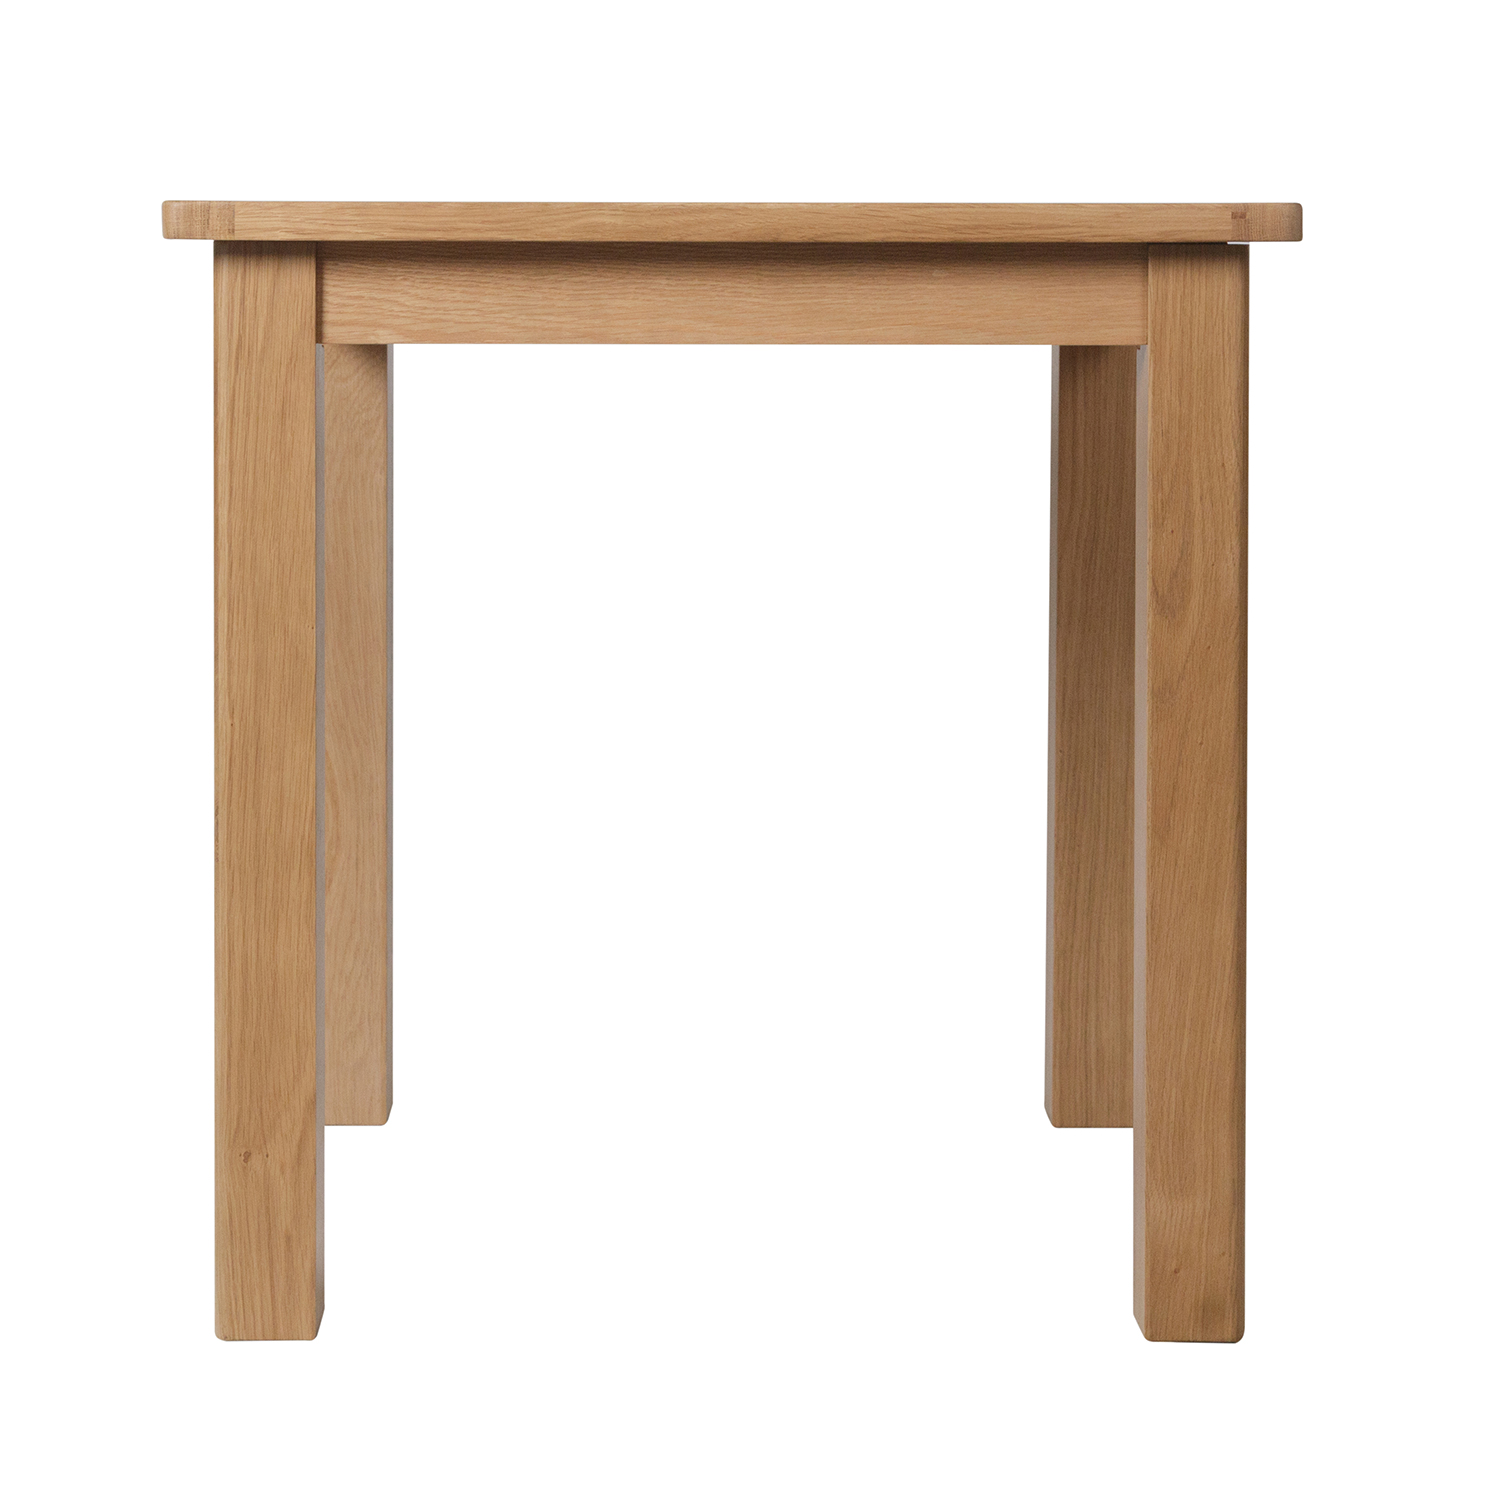 Chiltern Oak Fixed Top Table